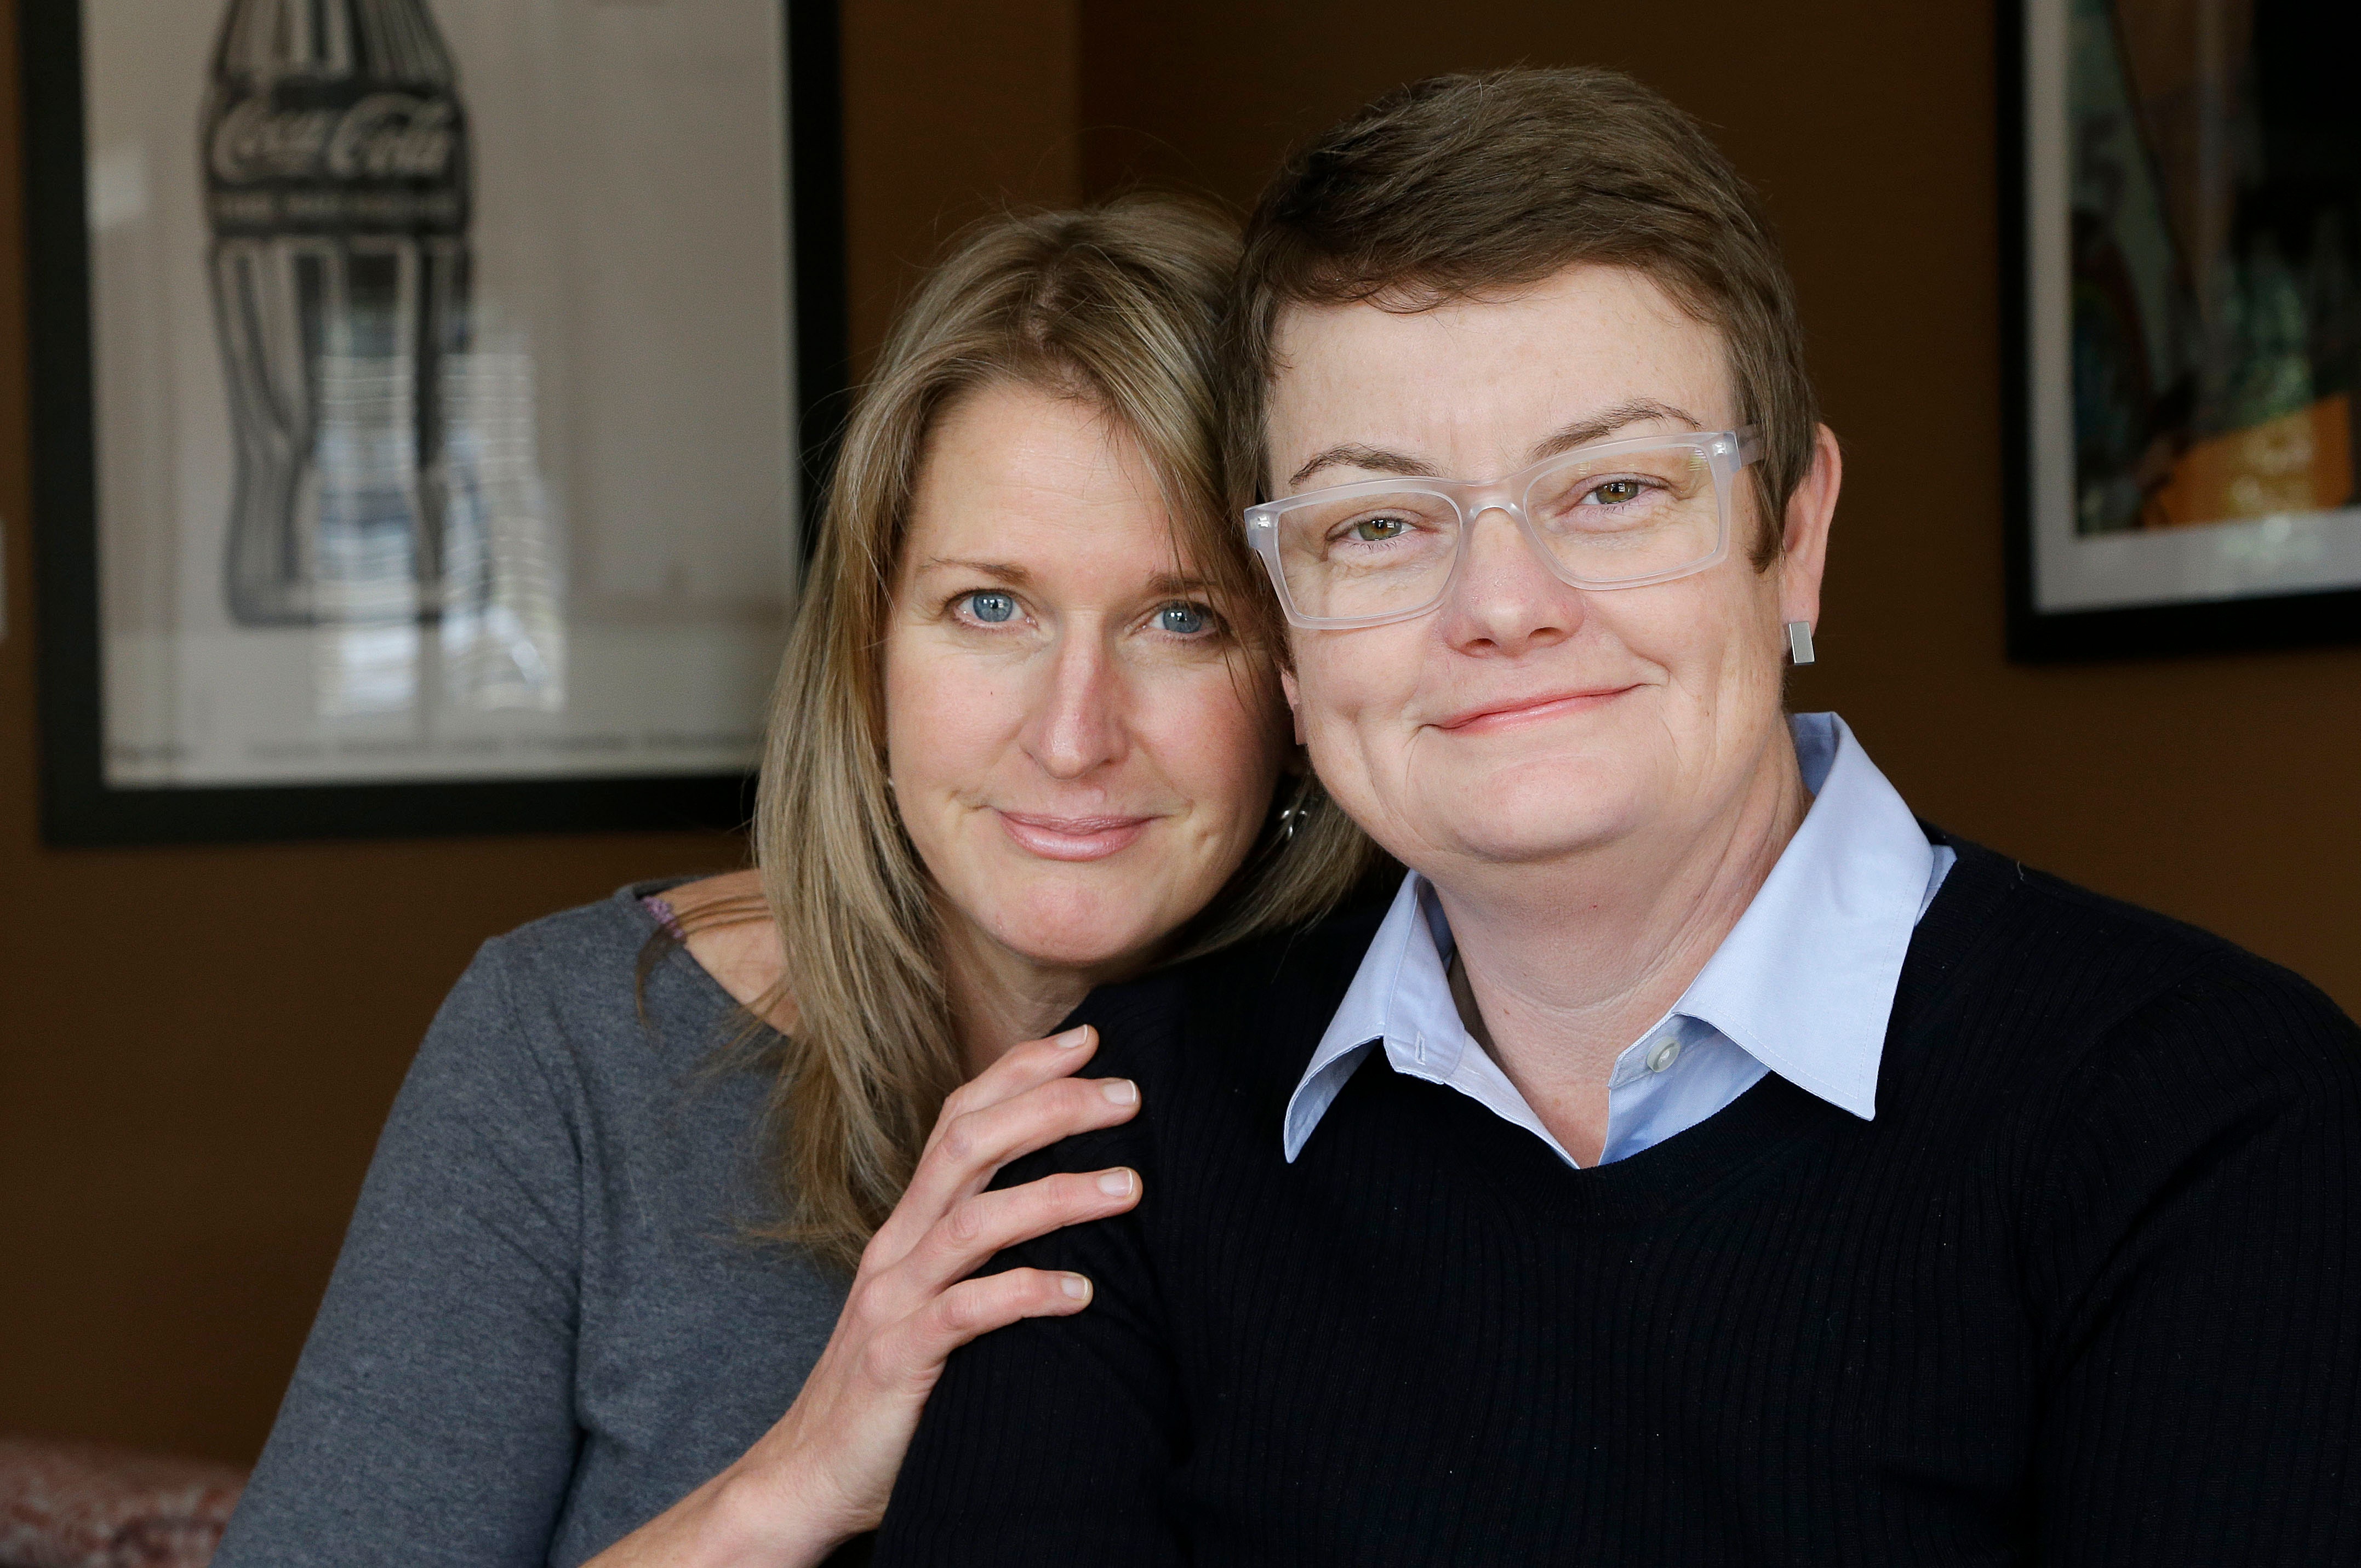 Lesbian Couple In Gay Marriage Case Prepares For Supreme Court Decision Fox News 5496